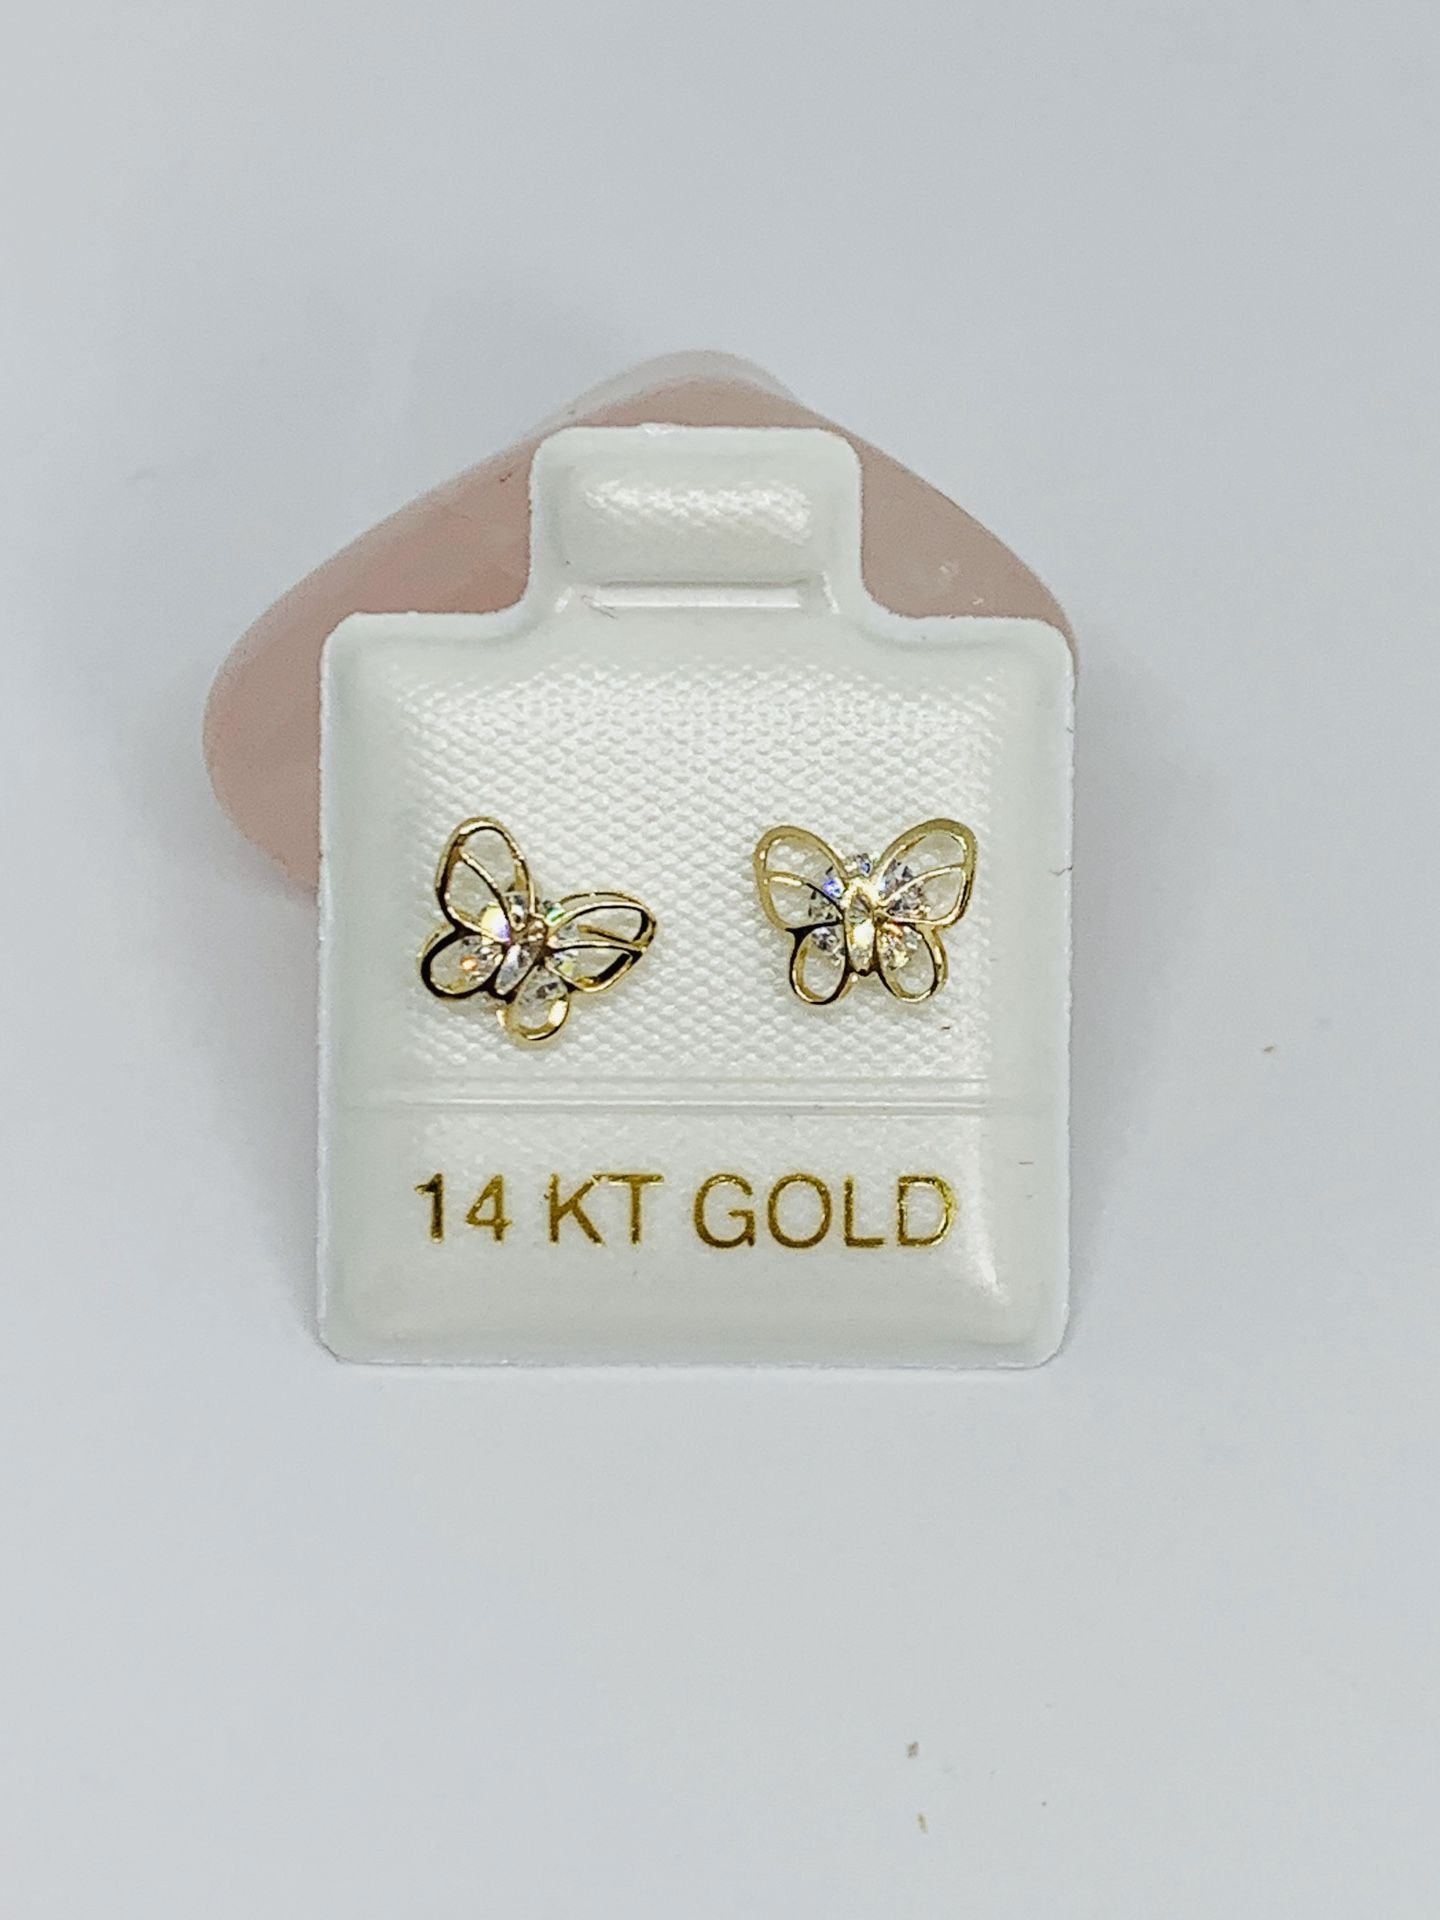 Real 14k Gold Earrings Butterfly Studs White Cubic Zirconia New Jewelry Aretes de Mariposa